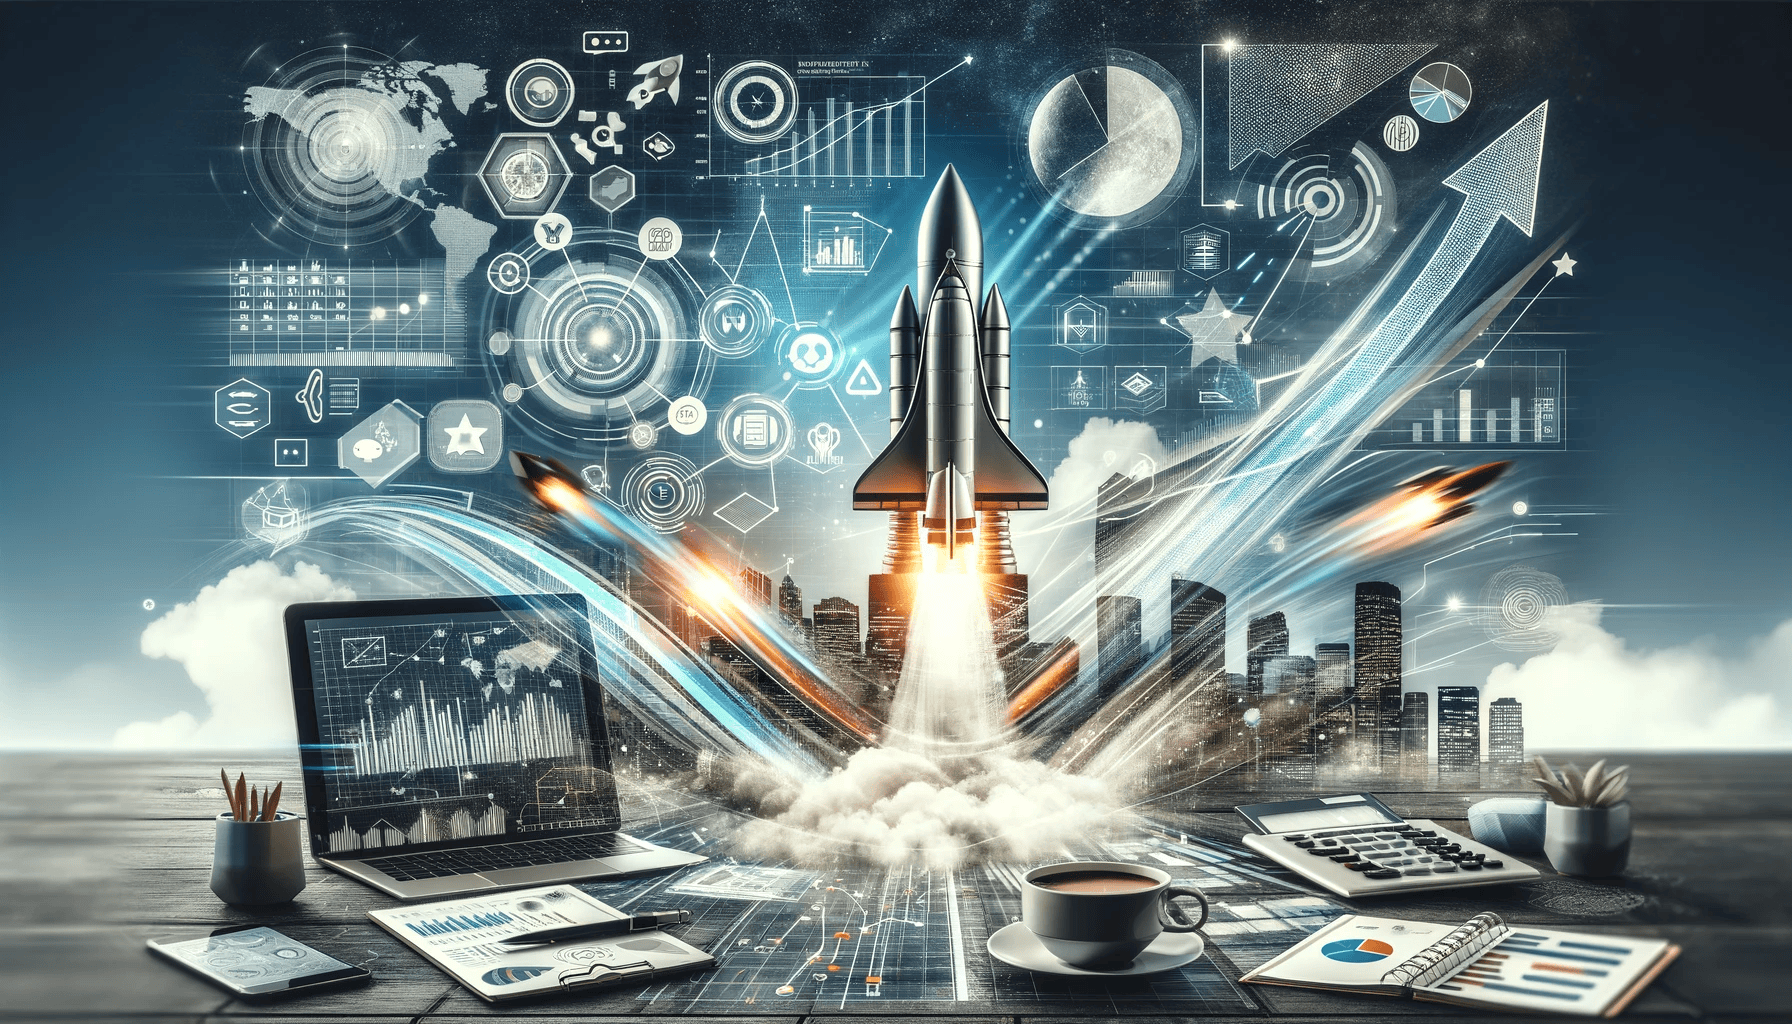 Conceptual representation of startup growth and strategy, featuring a rocket symbolizing rapid expansion, alongside charts, infographics, and digital devices, highlighting innovation and strategic planning in the startup journey.